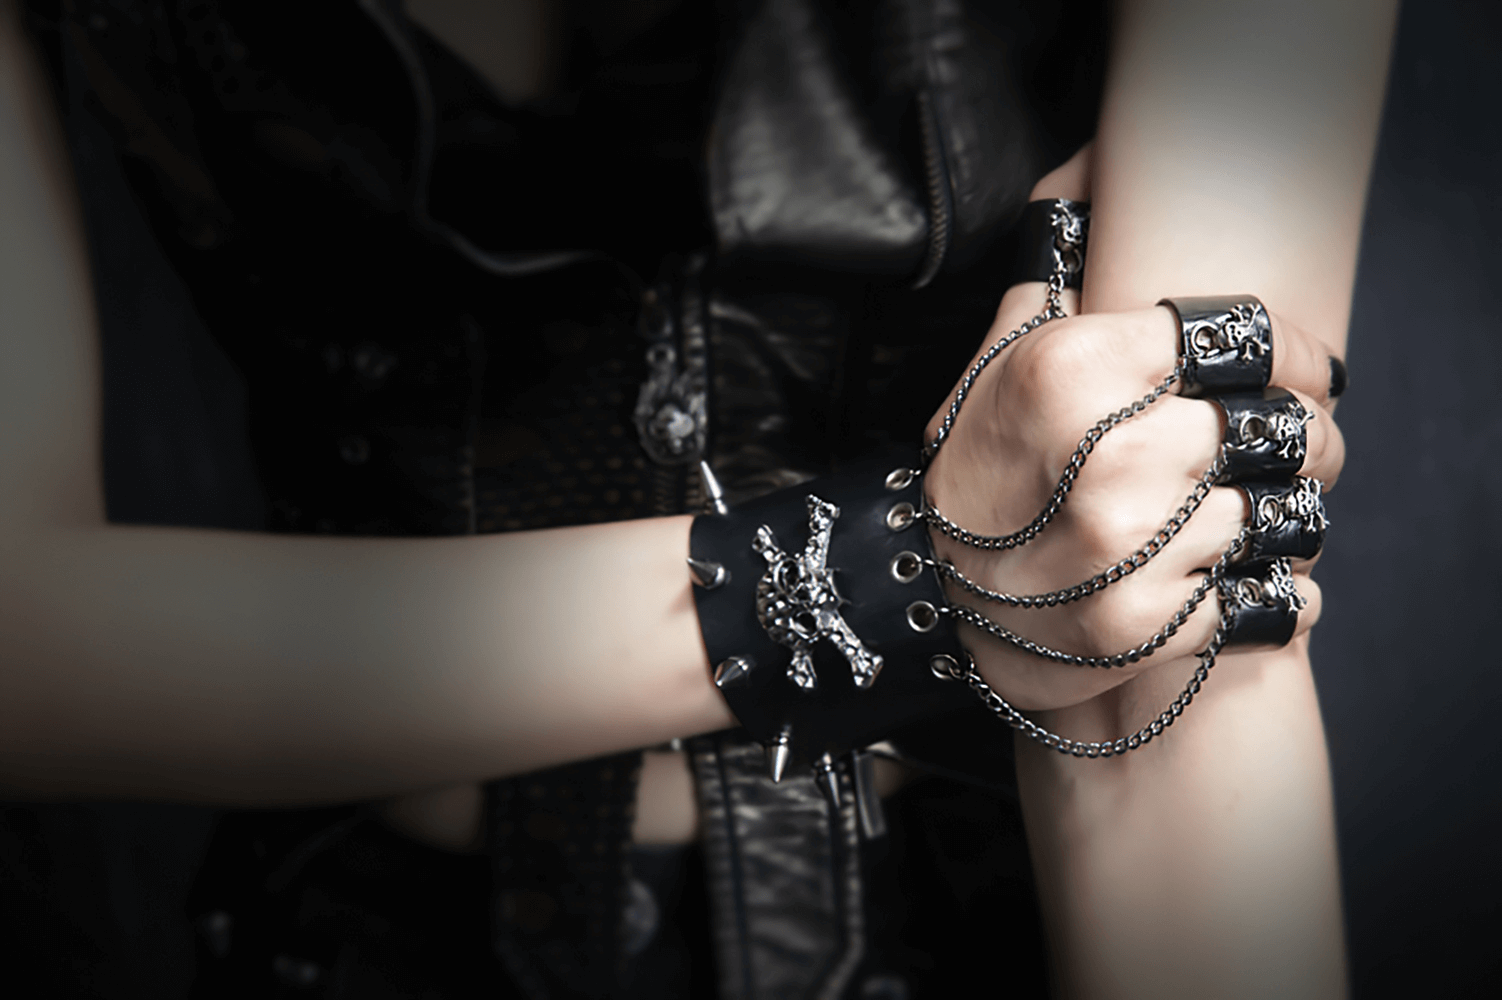 Gothic Faux Leather Glove Bracelet with Skull and Chains